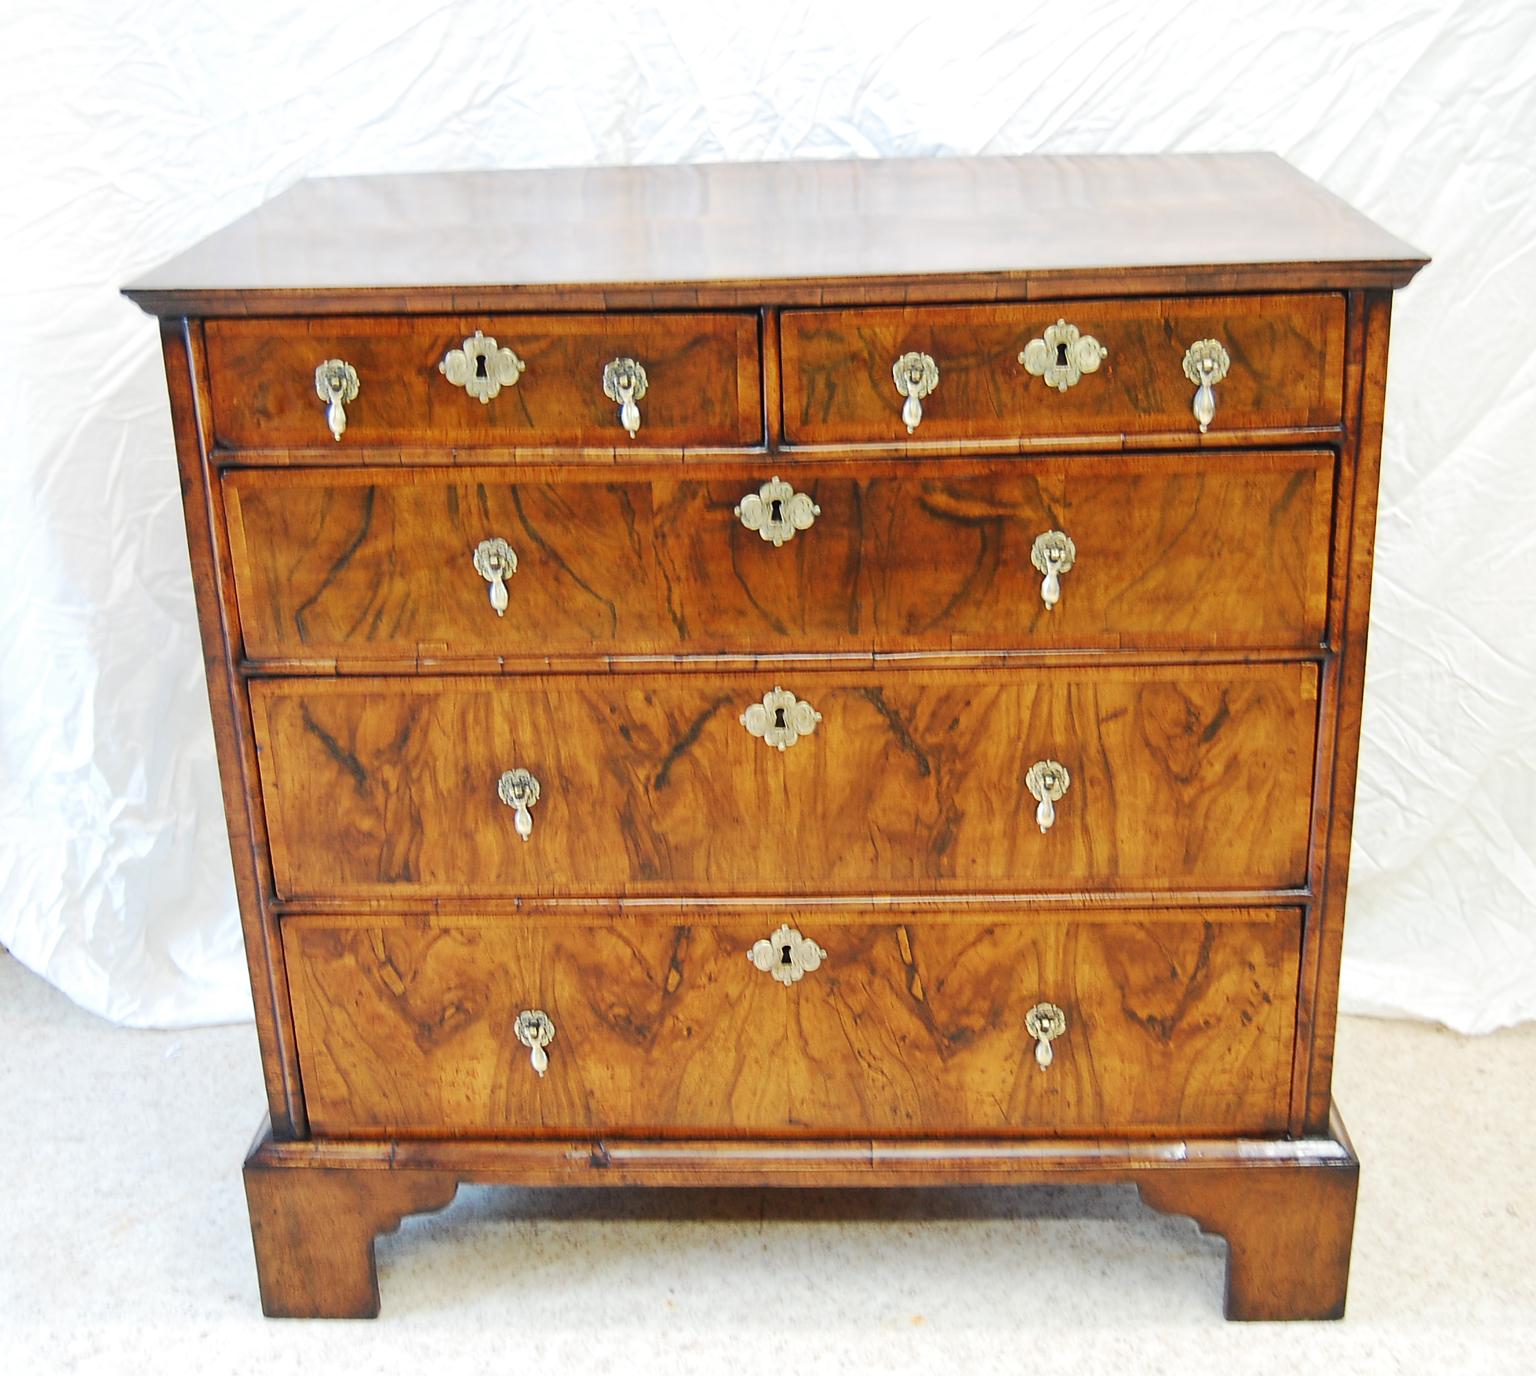   English Queen Anne period figured walnut chest of five graduated drawers.  The initial photo represents the true color of this chest -a rich honey color; most of the detail photos are a little darker than the chest actually is, apologies. The